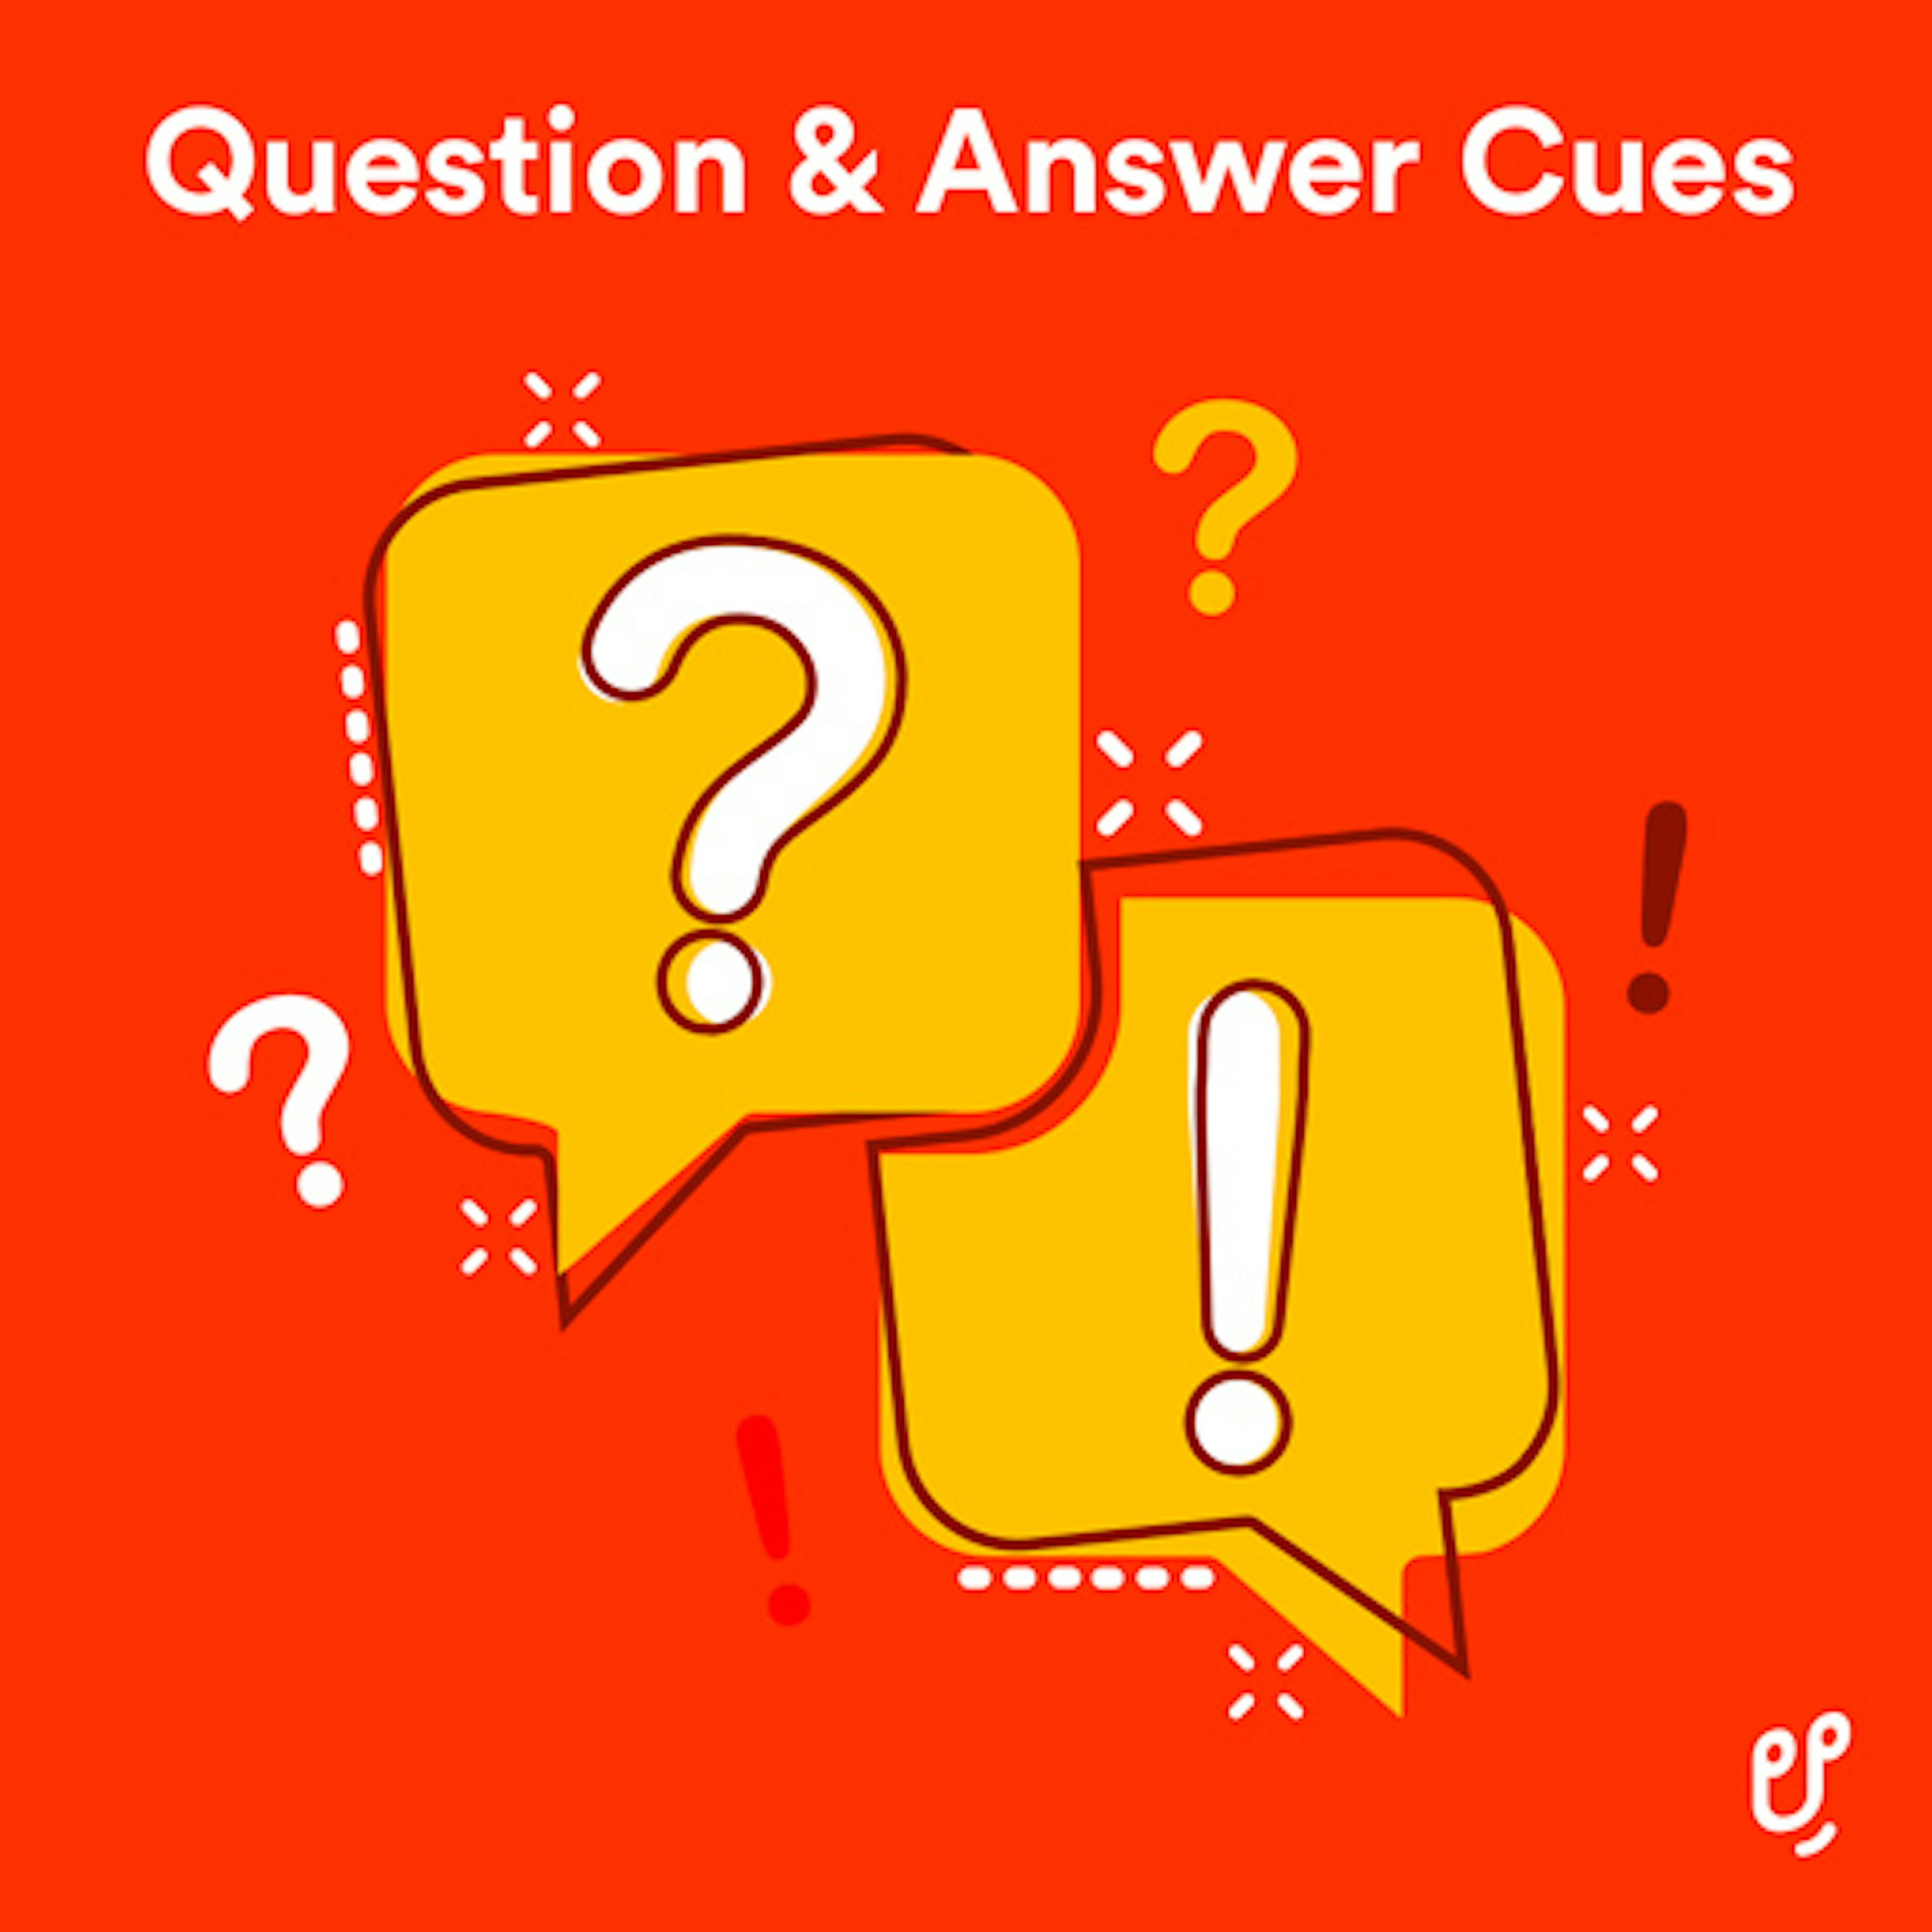 Question & Answer Cues artwork